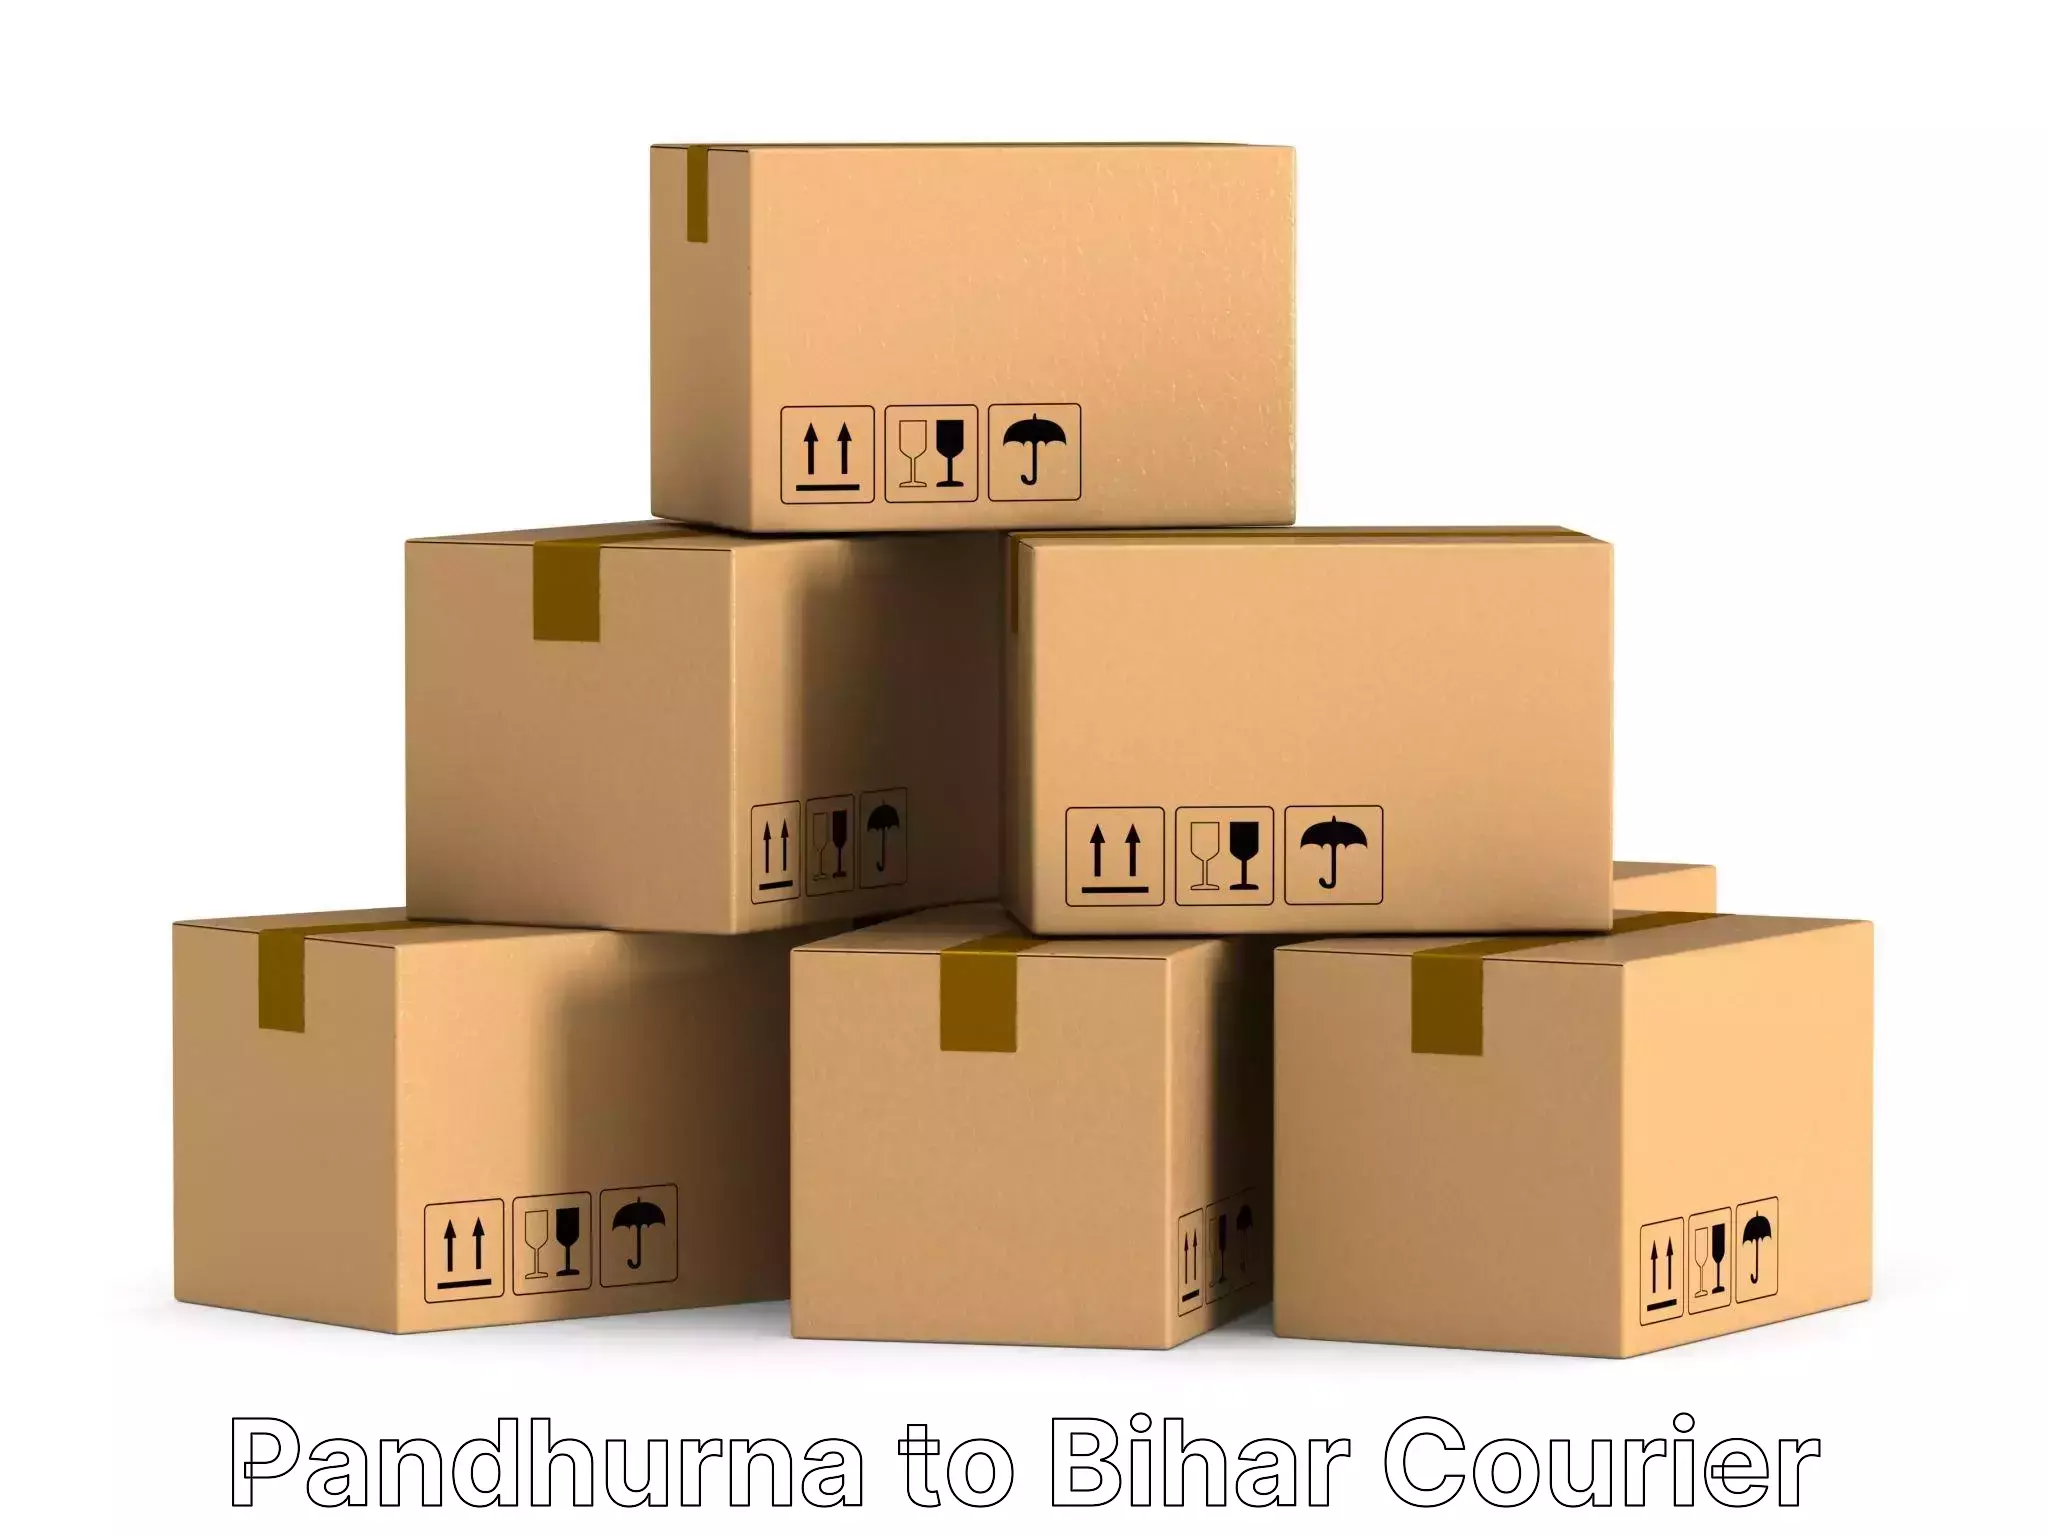 Quality relocation assistance Pandhurna to Bhorey